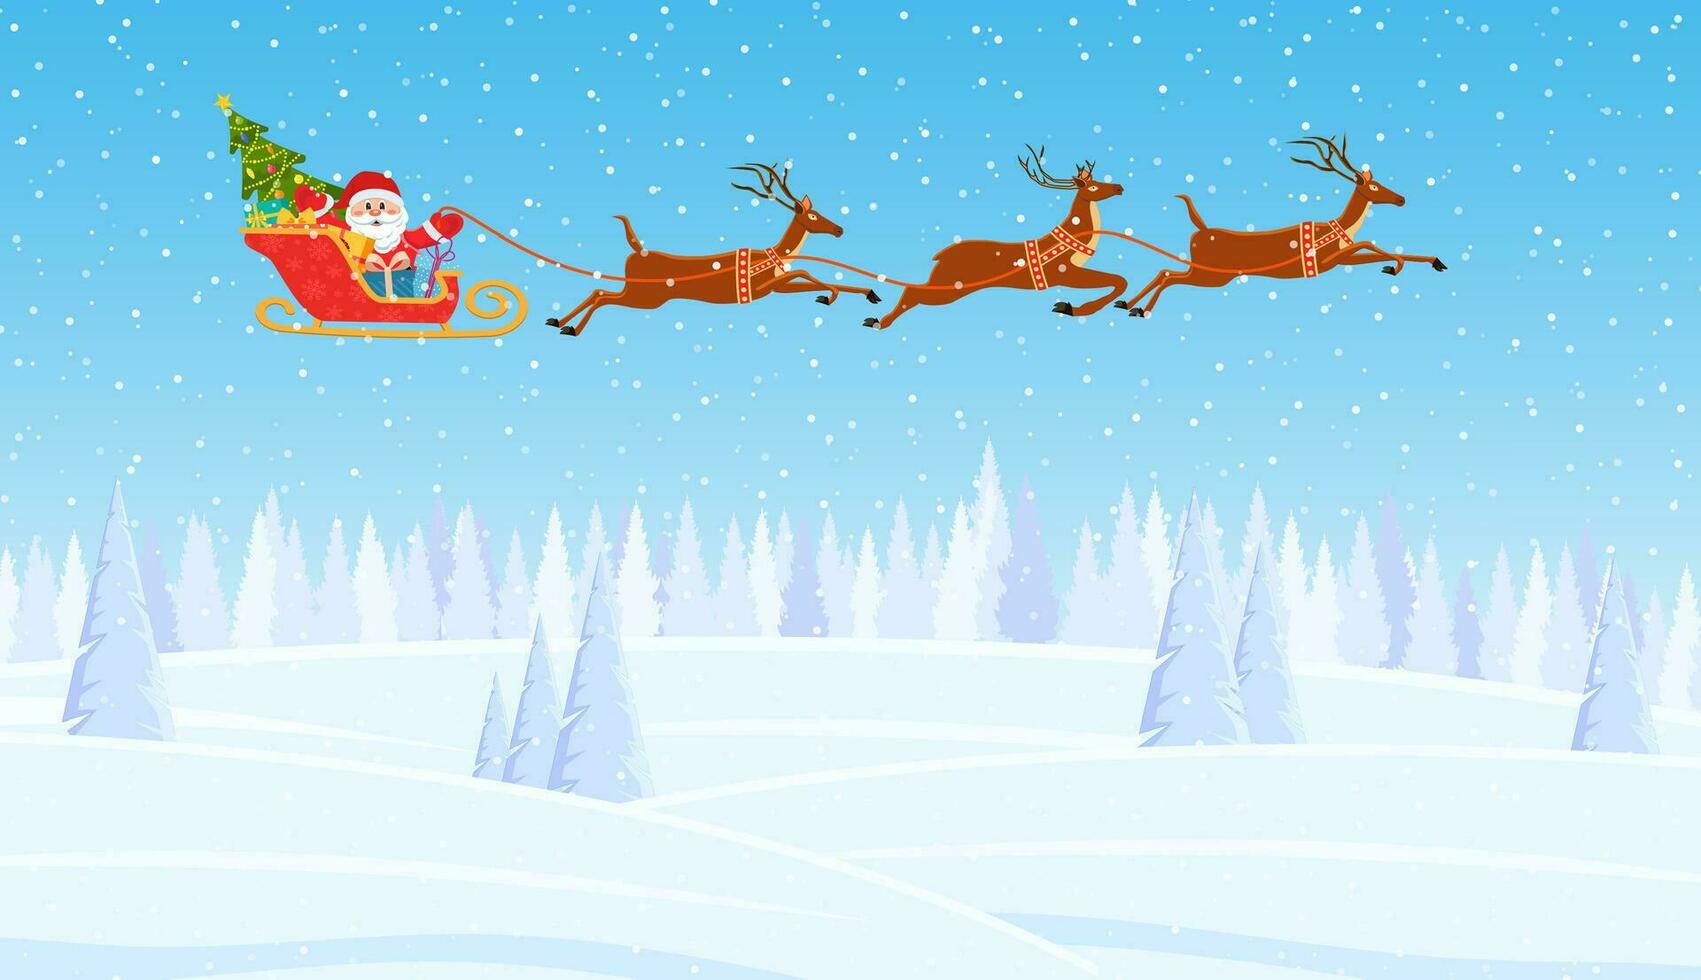 Christmas Santa Claus riding on sleigh. concept for greeting or postal card, vector illustration. Merry christmas holiday. New year and xmas celebration